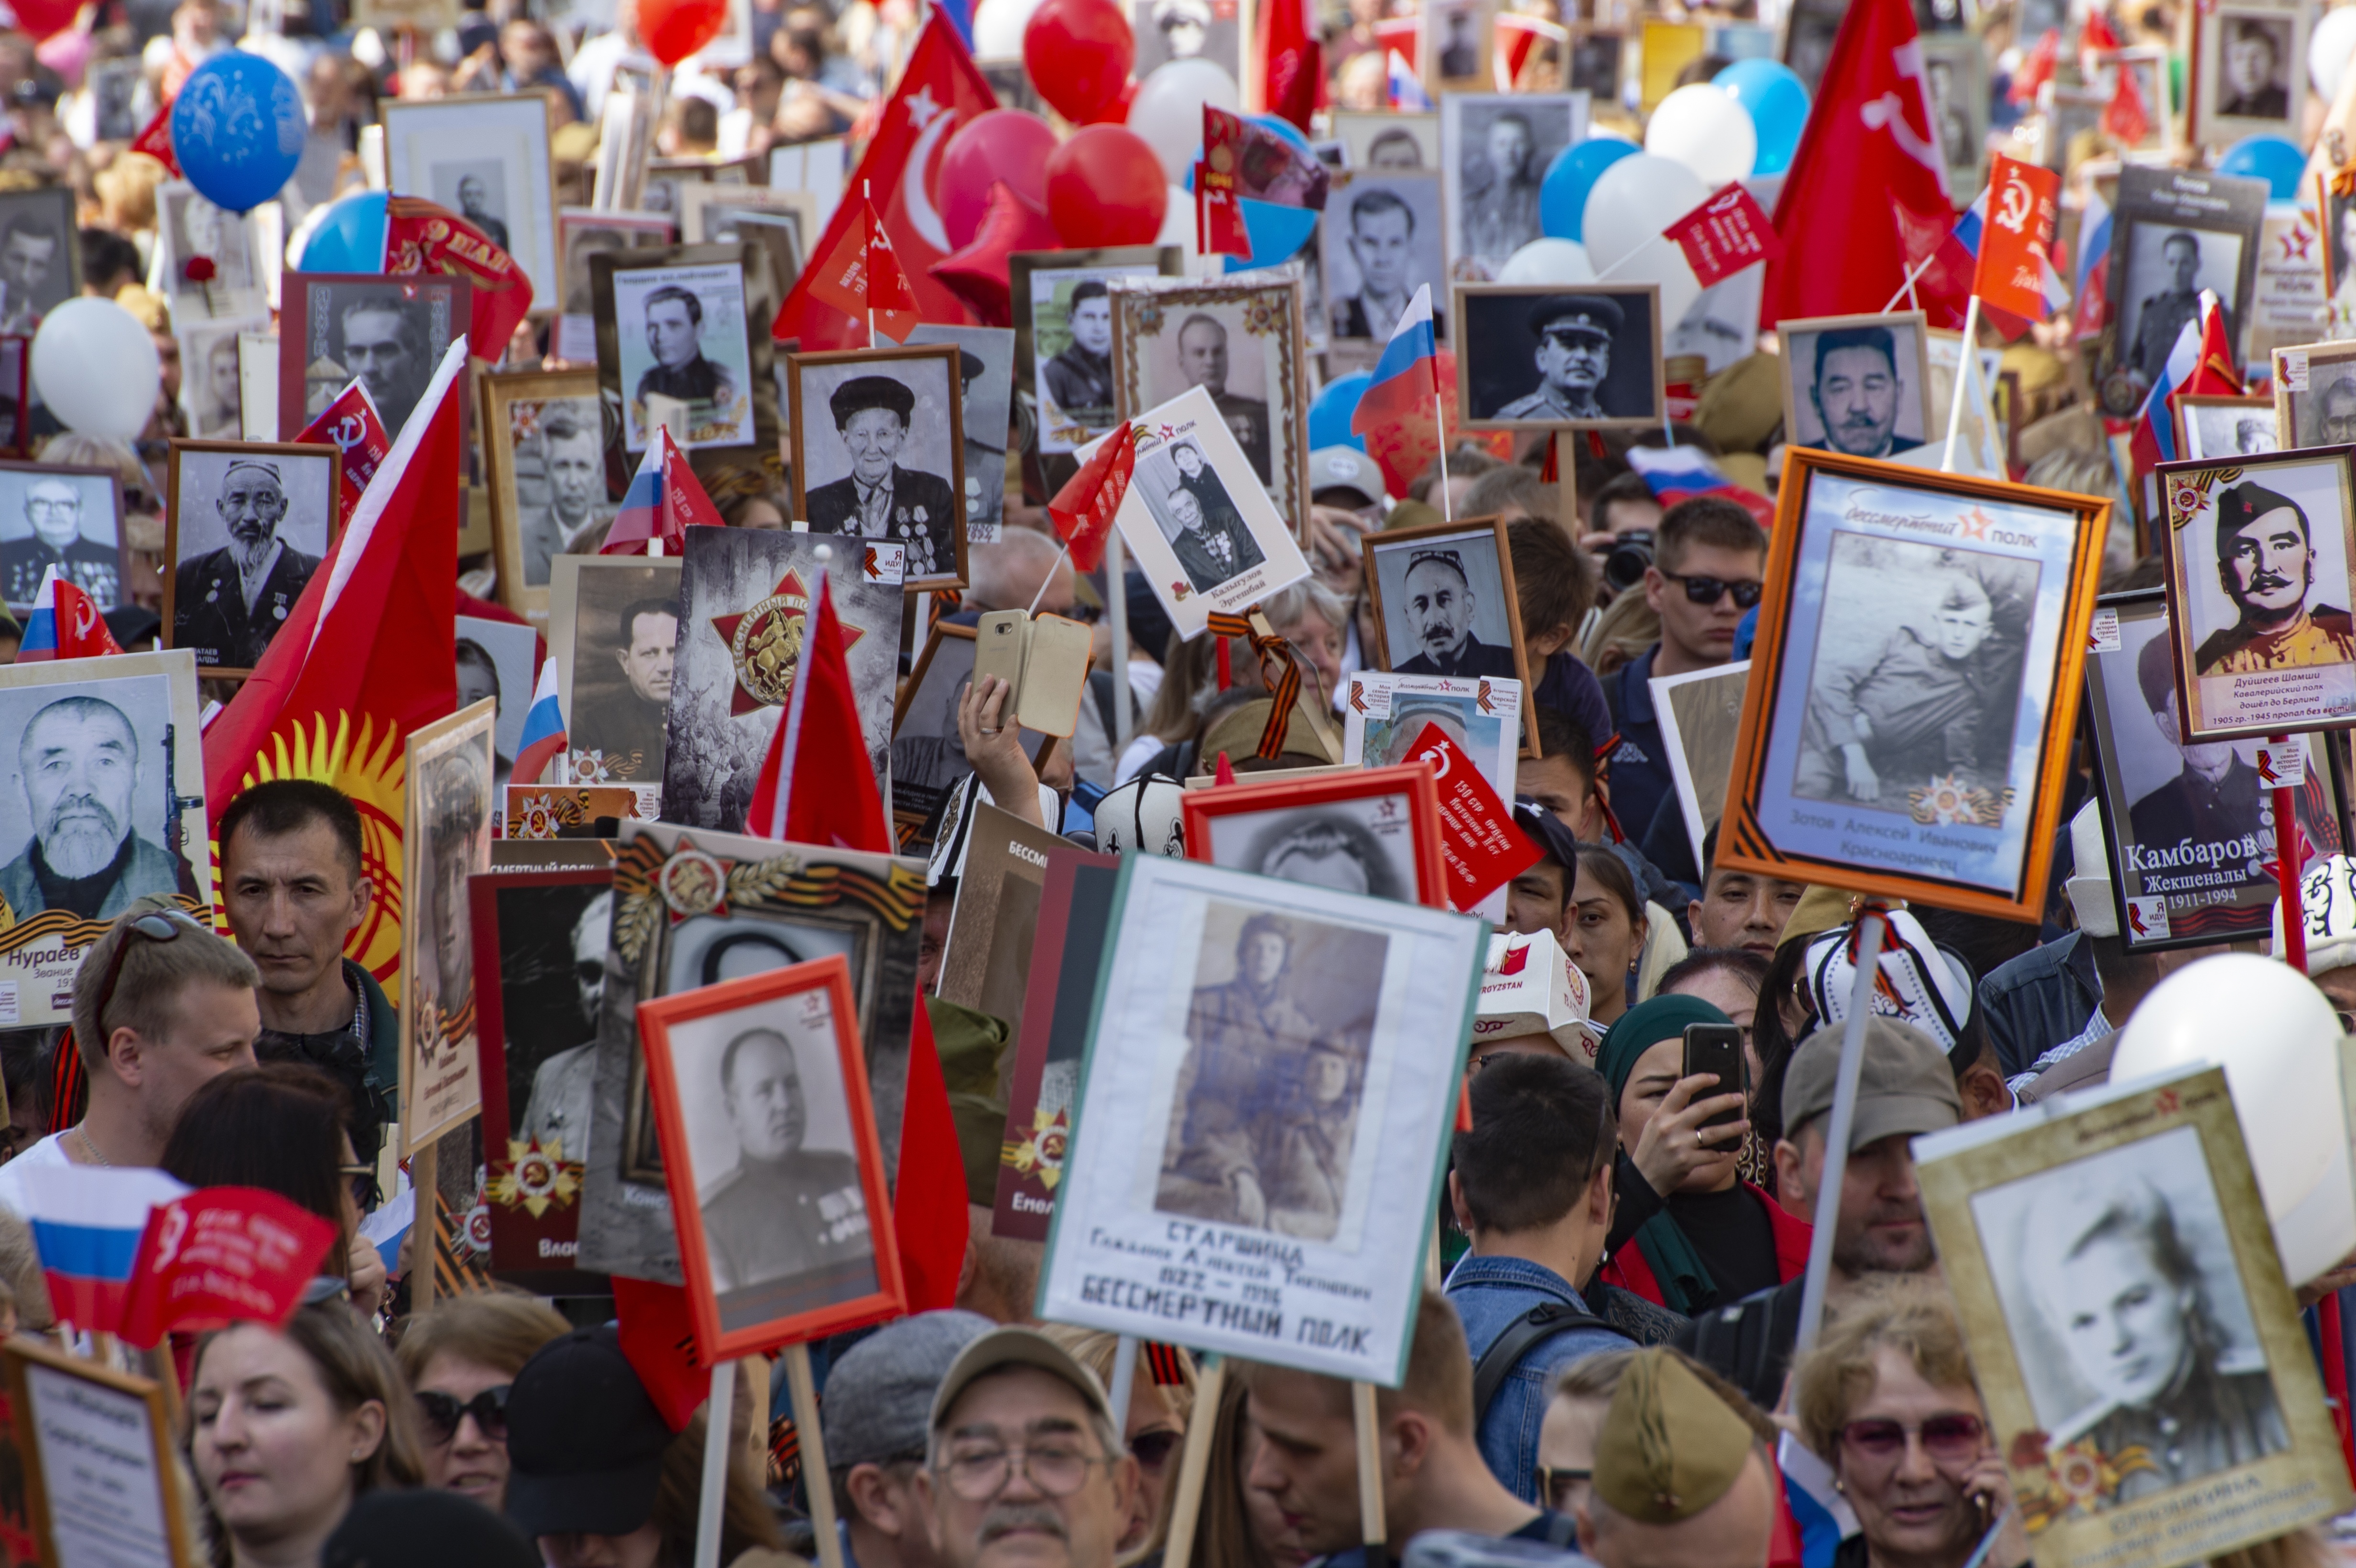 People carry portraits of relatives who fought in World War II, and Russian and Soviet flags, during the Immortal Regiment march through the main street toward Red Square in Moscow, Russia, Thursday, May 9, 2019, celebrating 74 years since the end of WWII and the defeat of Nazi Germany. (AP Photo/Dmitry Serebryakov)